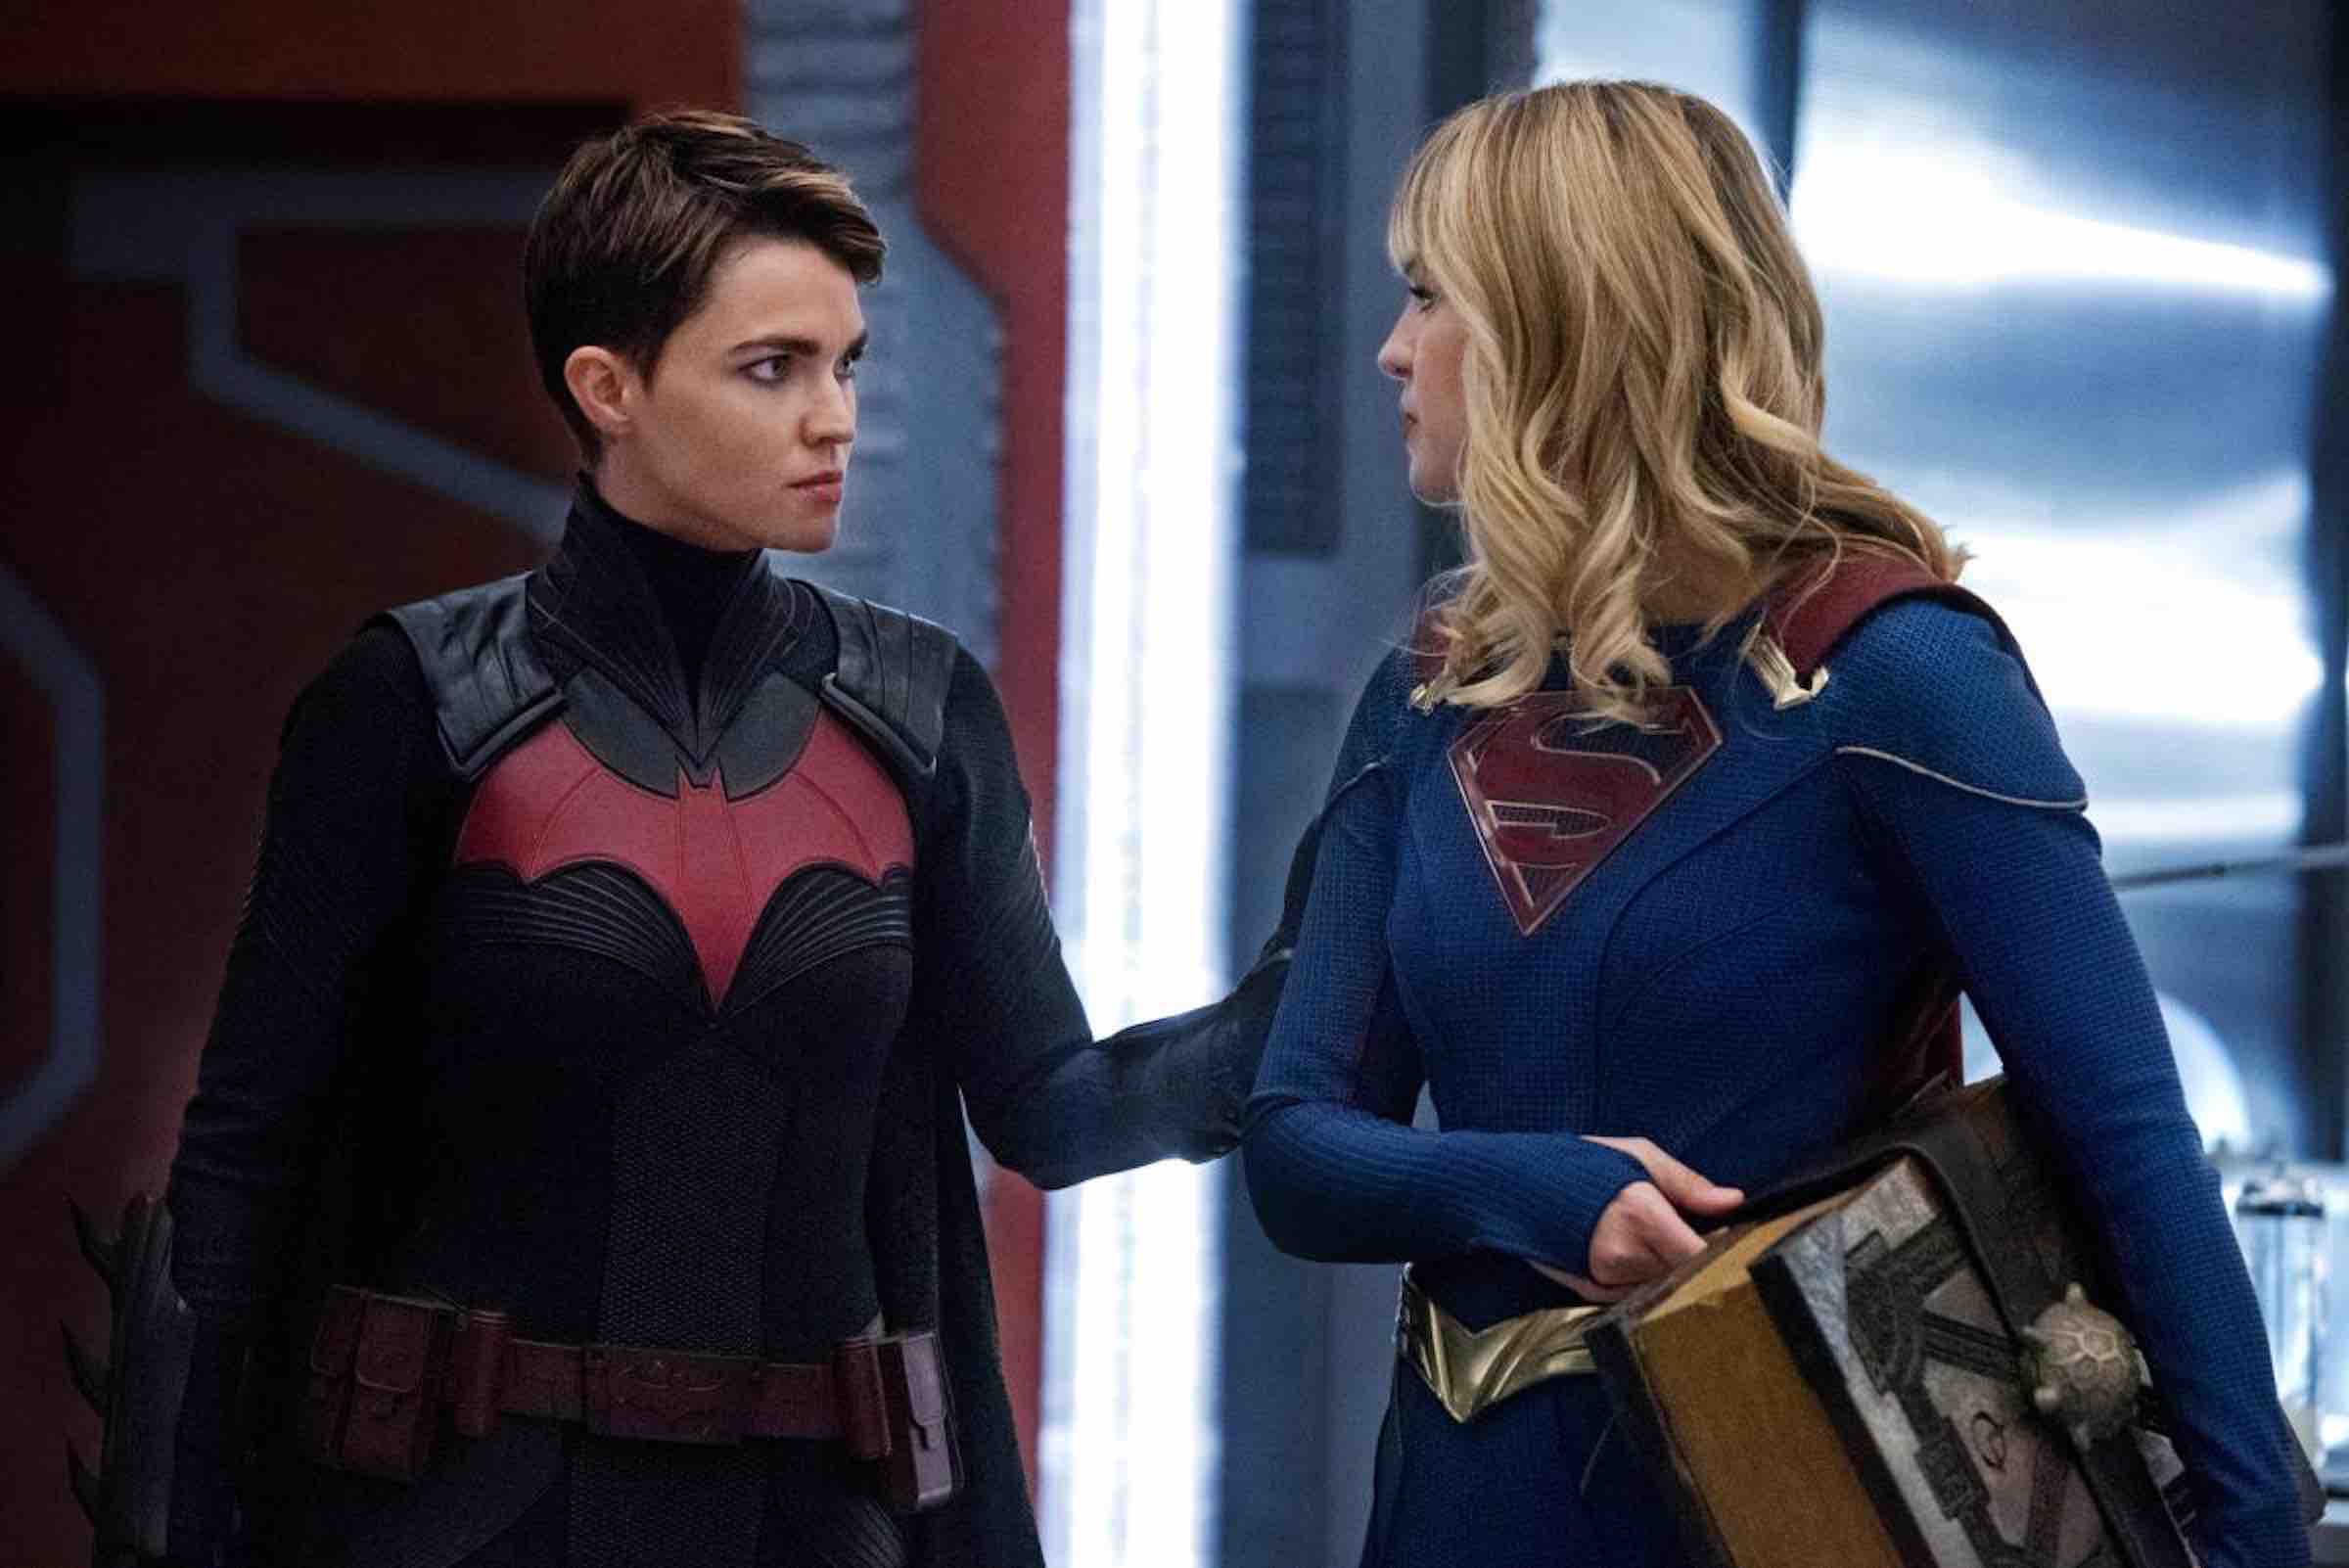 Between the brief team-up we saw in 'Elseworlds' plus 'Crisis on Infinite Earths', we’re demanding a 'Supergirl' and 'Batwoman' solo crossover. Here's why.